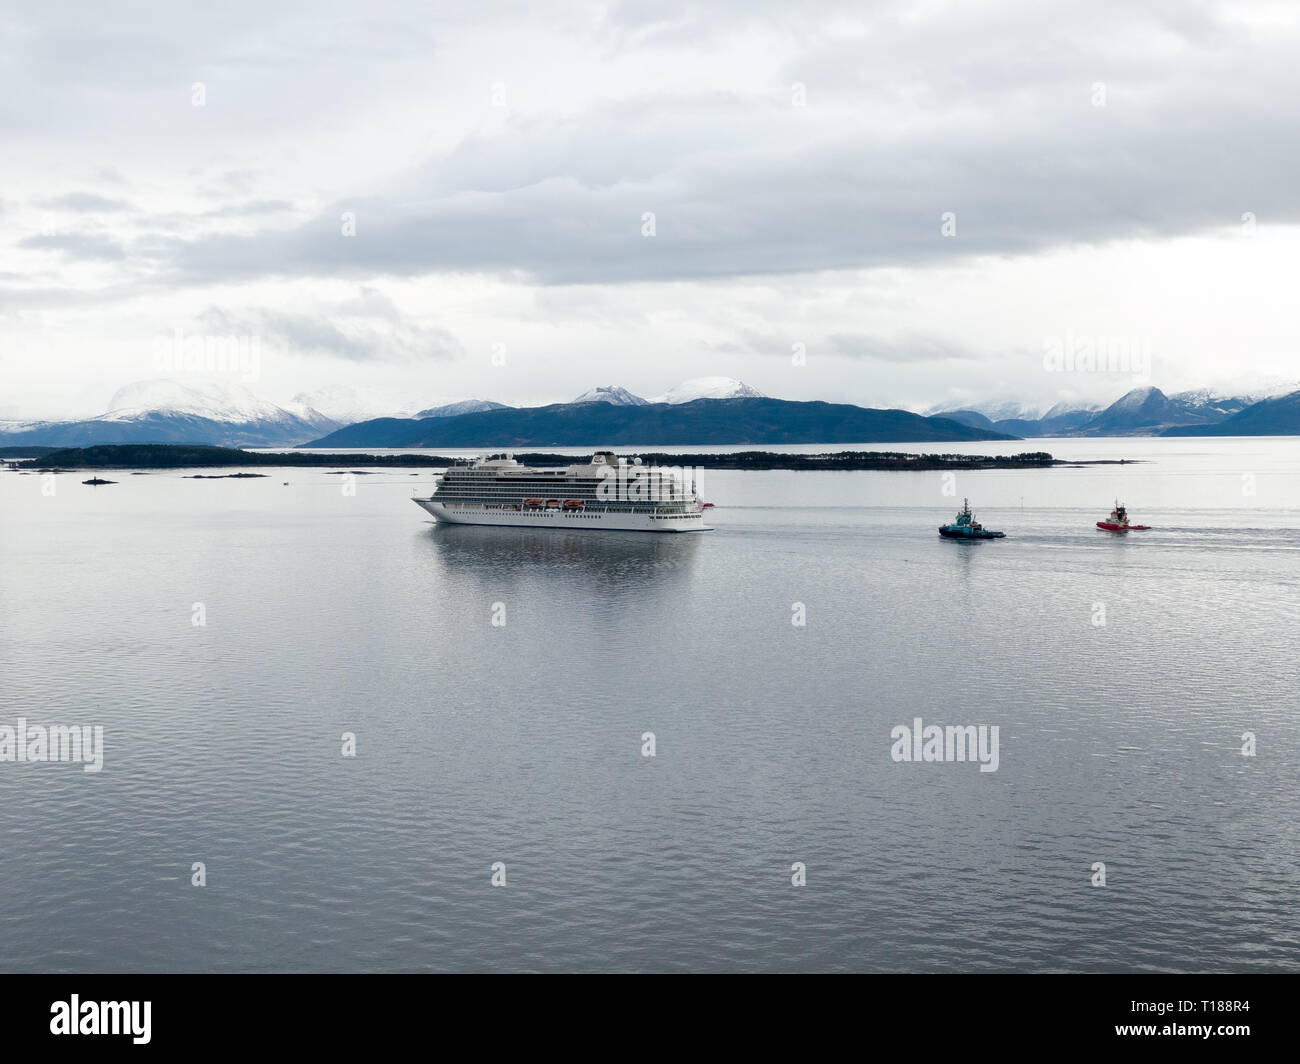 Port Molde High Resolution Stock Photography and Images - Alamy